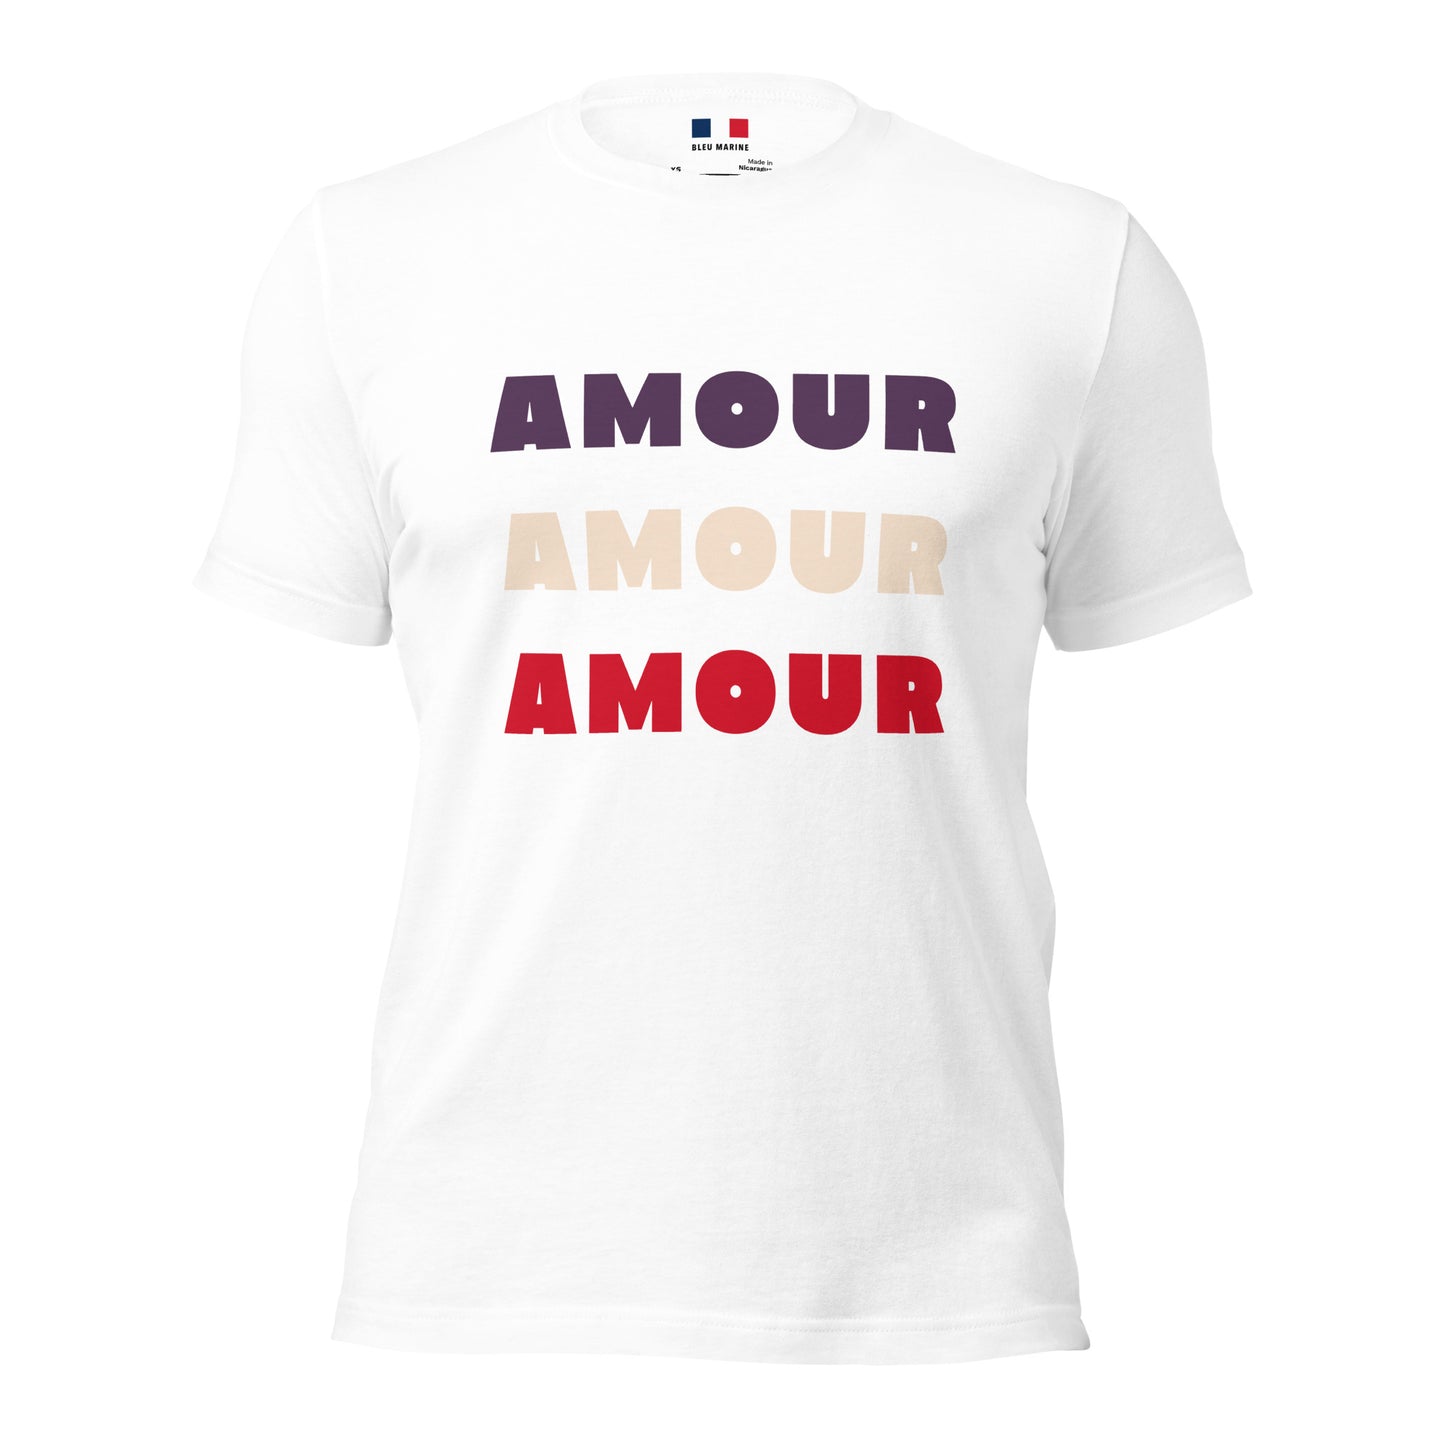 AMOUR AMOUR AMOUR Tee